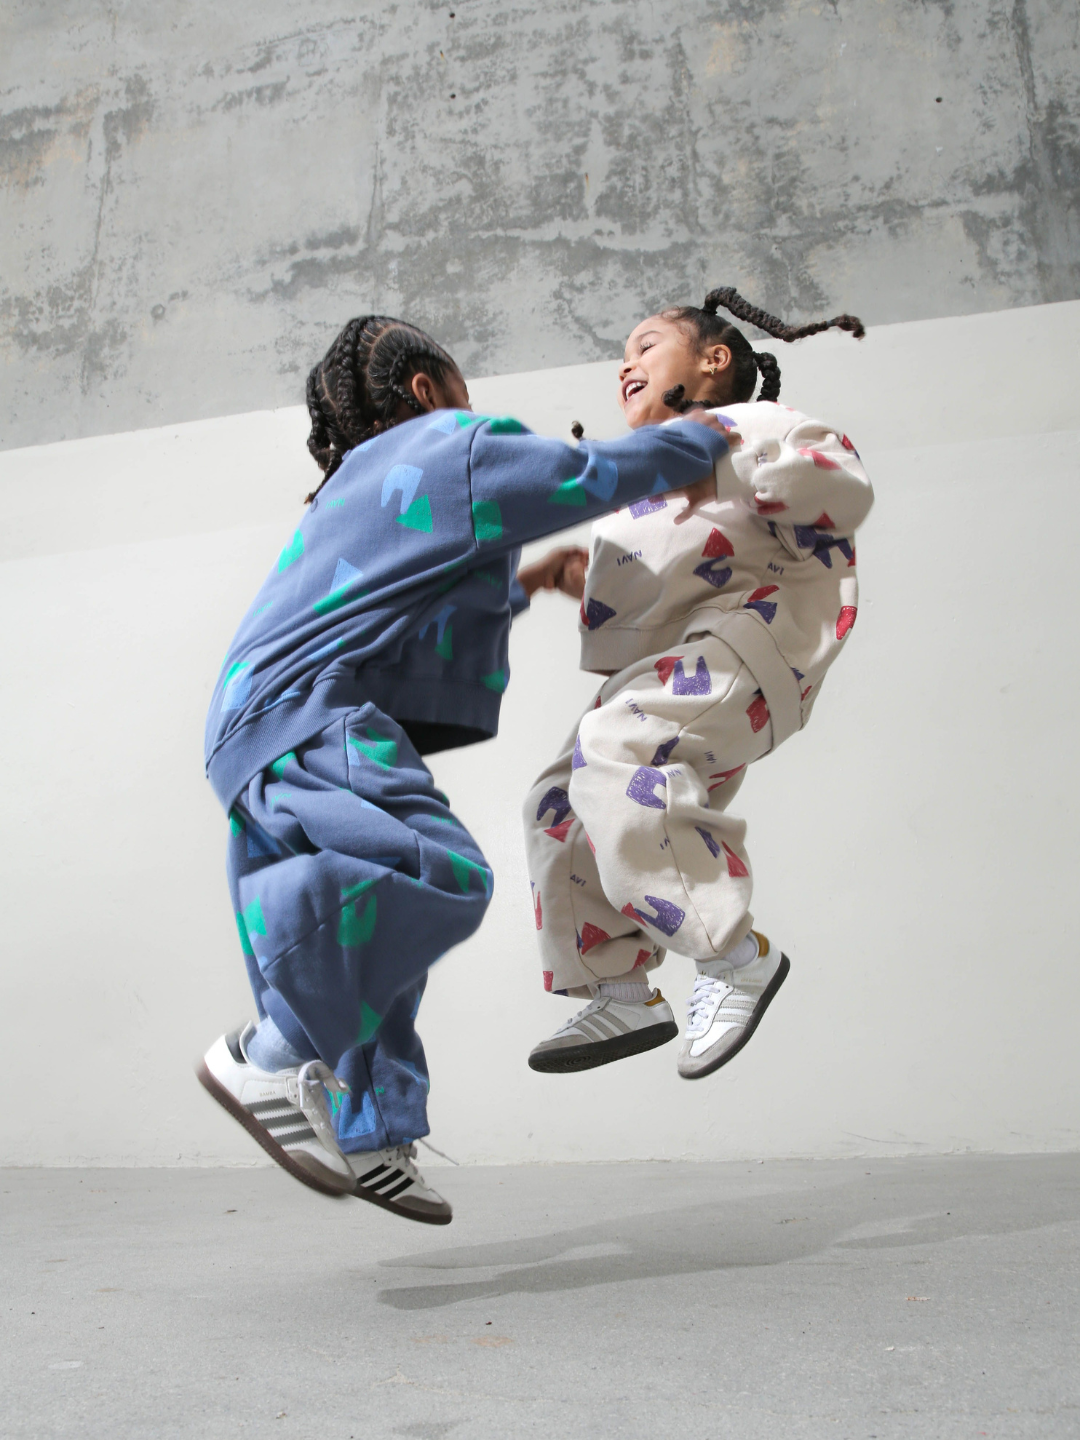 Child wearing blue sweatpants with an all over pattern of green and blue shapes and the brand name Navi, with matching crewneck sweatshirt. He is jumping in front of a grey background, holding hands with another child in the same outfit in the oatmeal colorway.